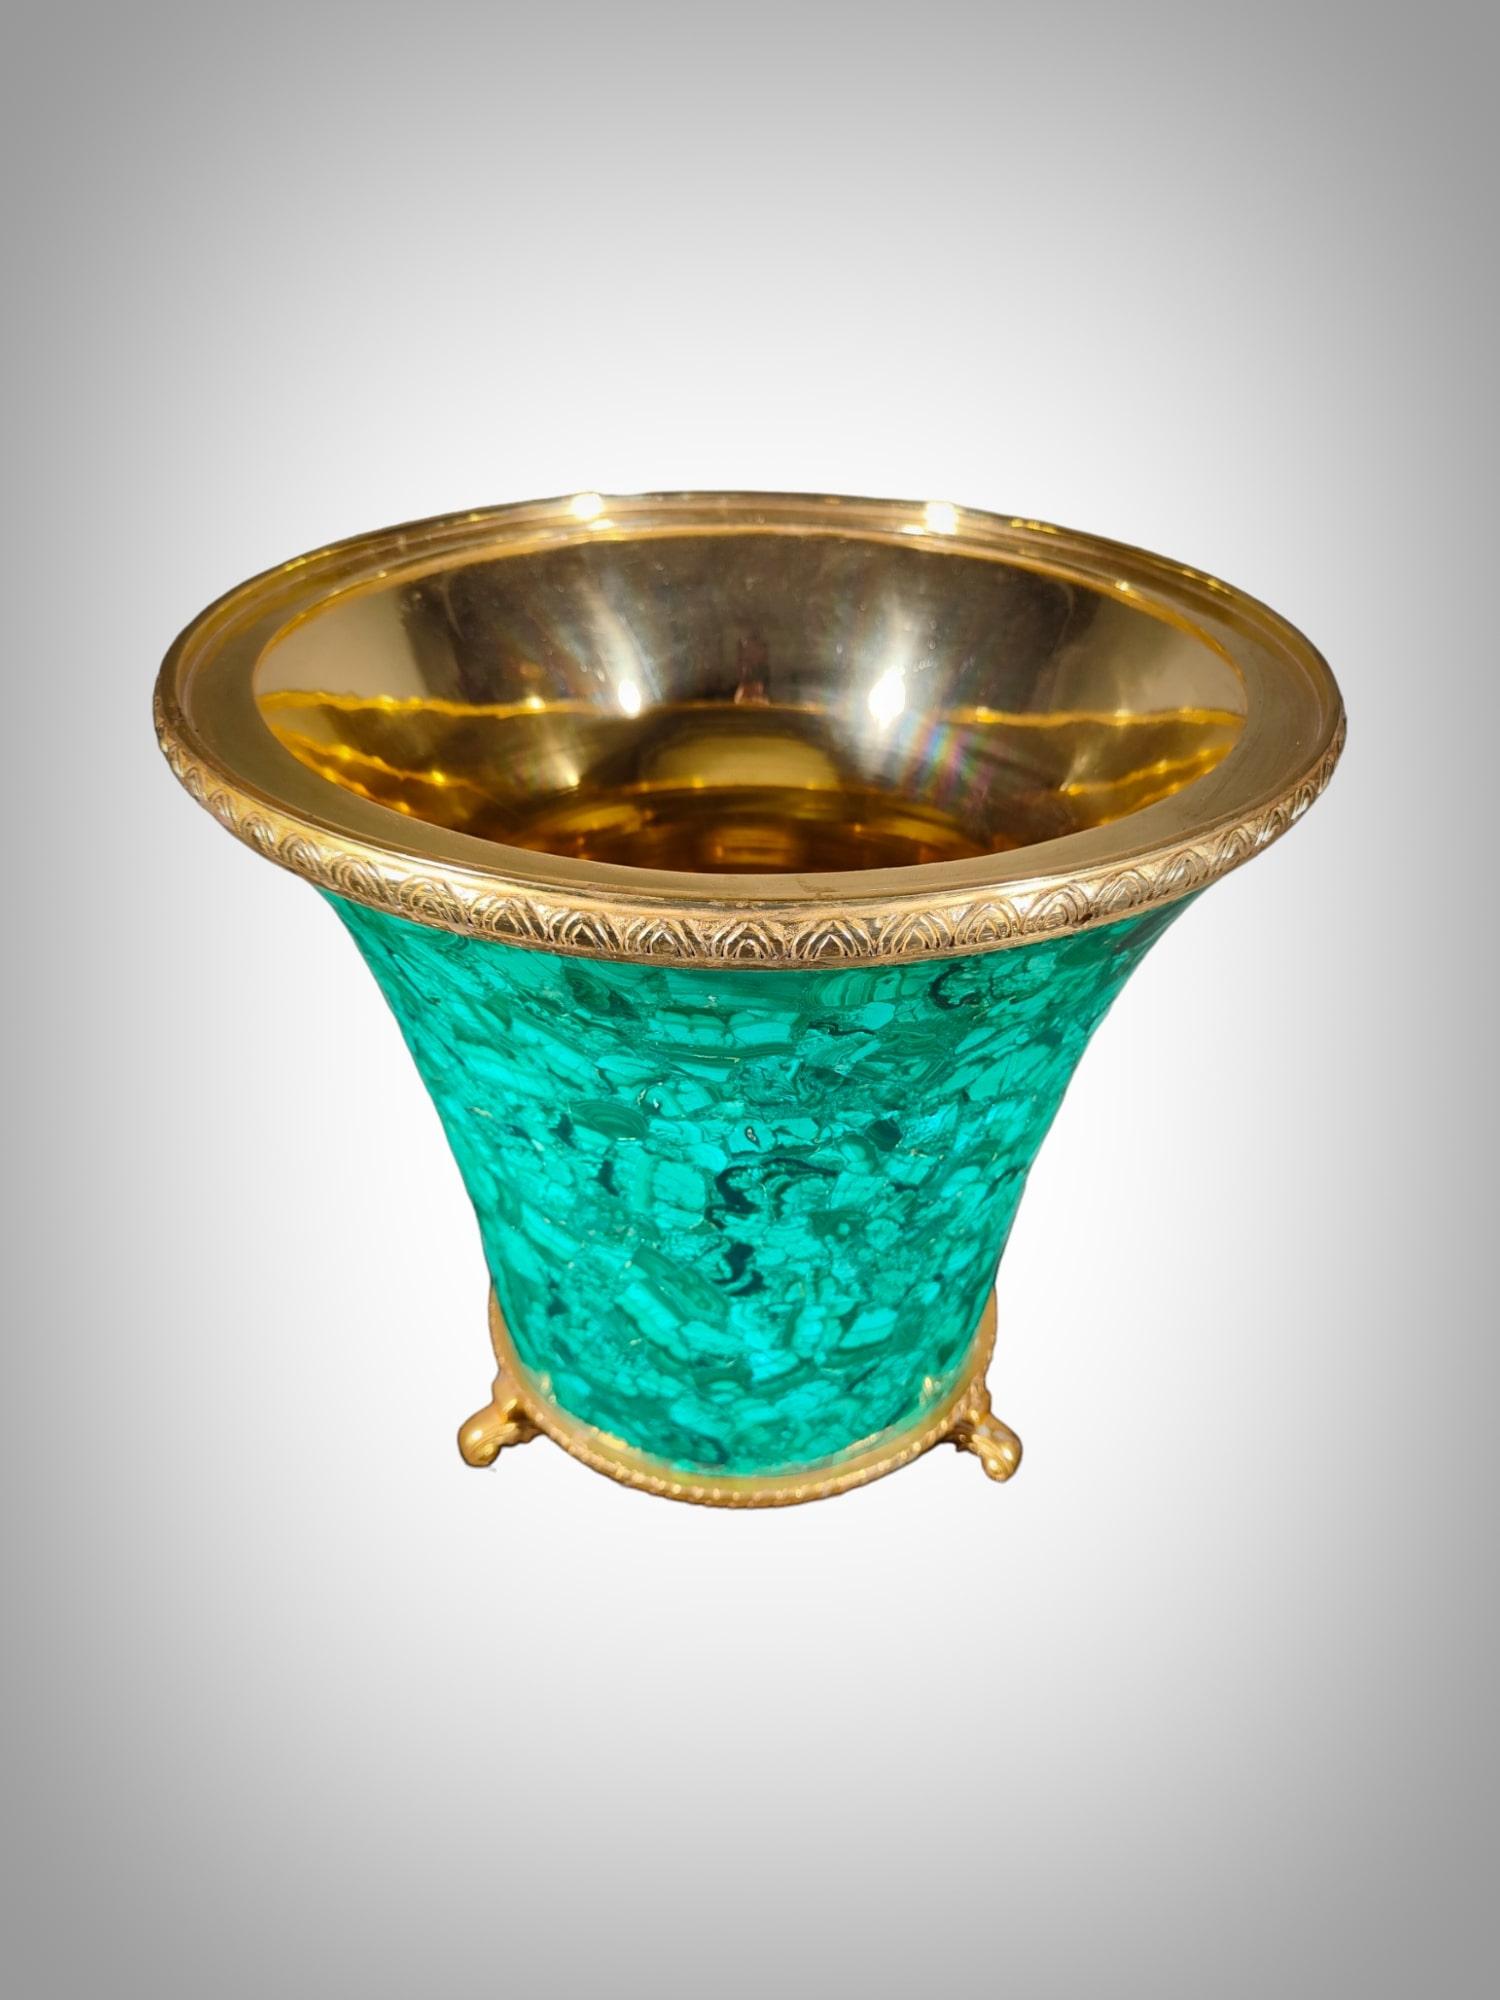 This spectacular 1950s Italian wine cooler, crafted in malachite, is a testament to the exquisite craftsmanship of the era. The combination of the dazzling green malachite and the golden brass interior adds a touch of opulence to this piece. This